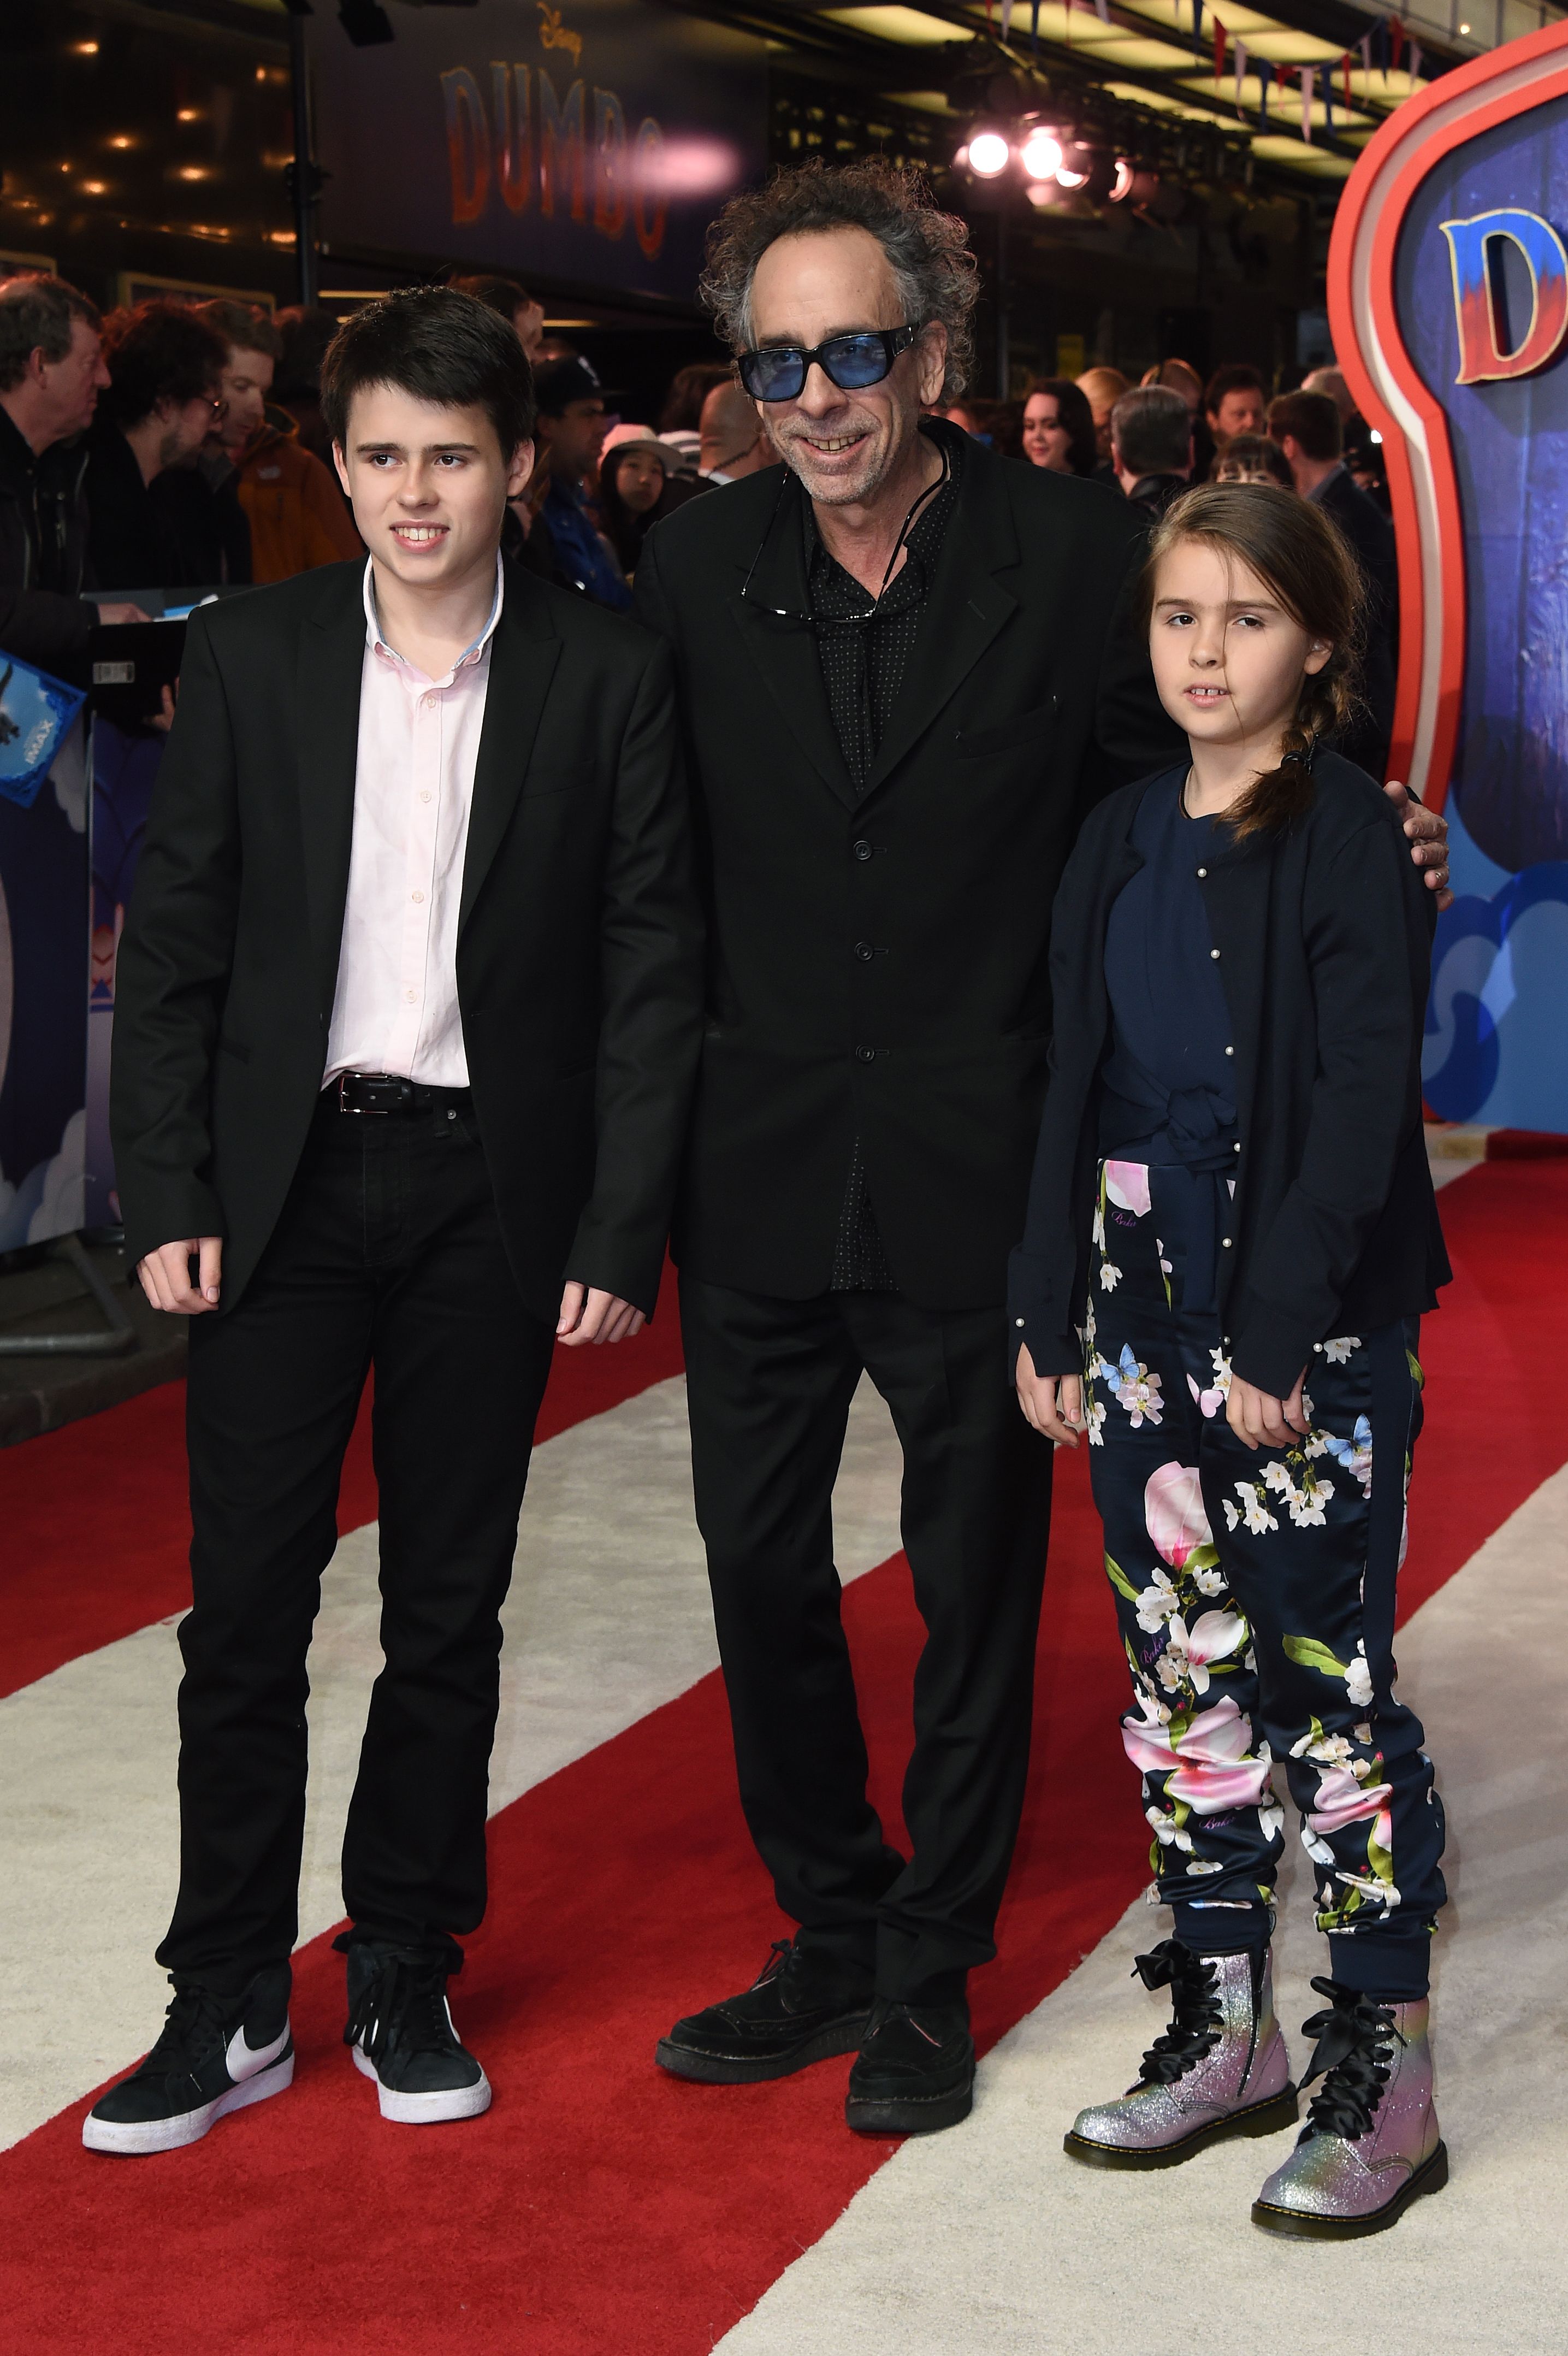 Tim Burton, Billy Burton, and Nell Burton during the "Dumbo" European premiere at The Curzon Mayfair on March 21, 2019, in London, England. | Source: Getty Images